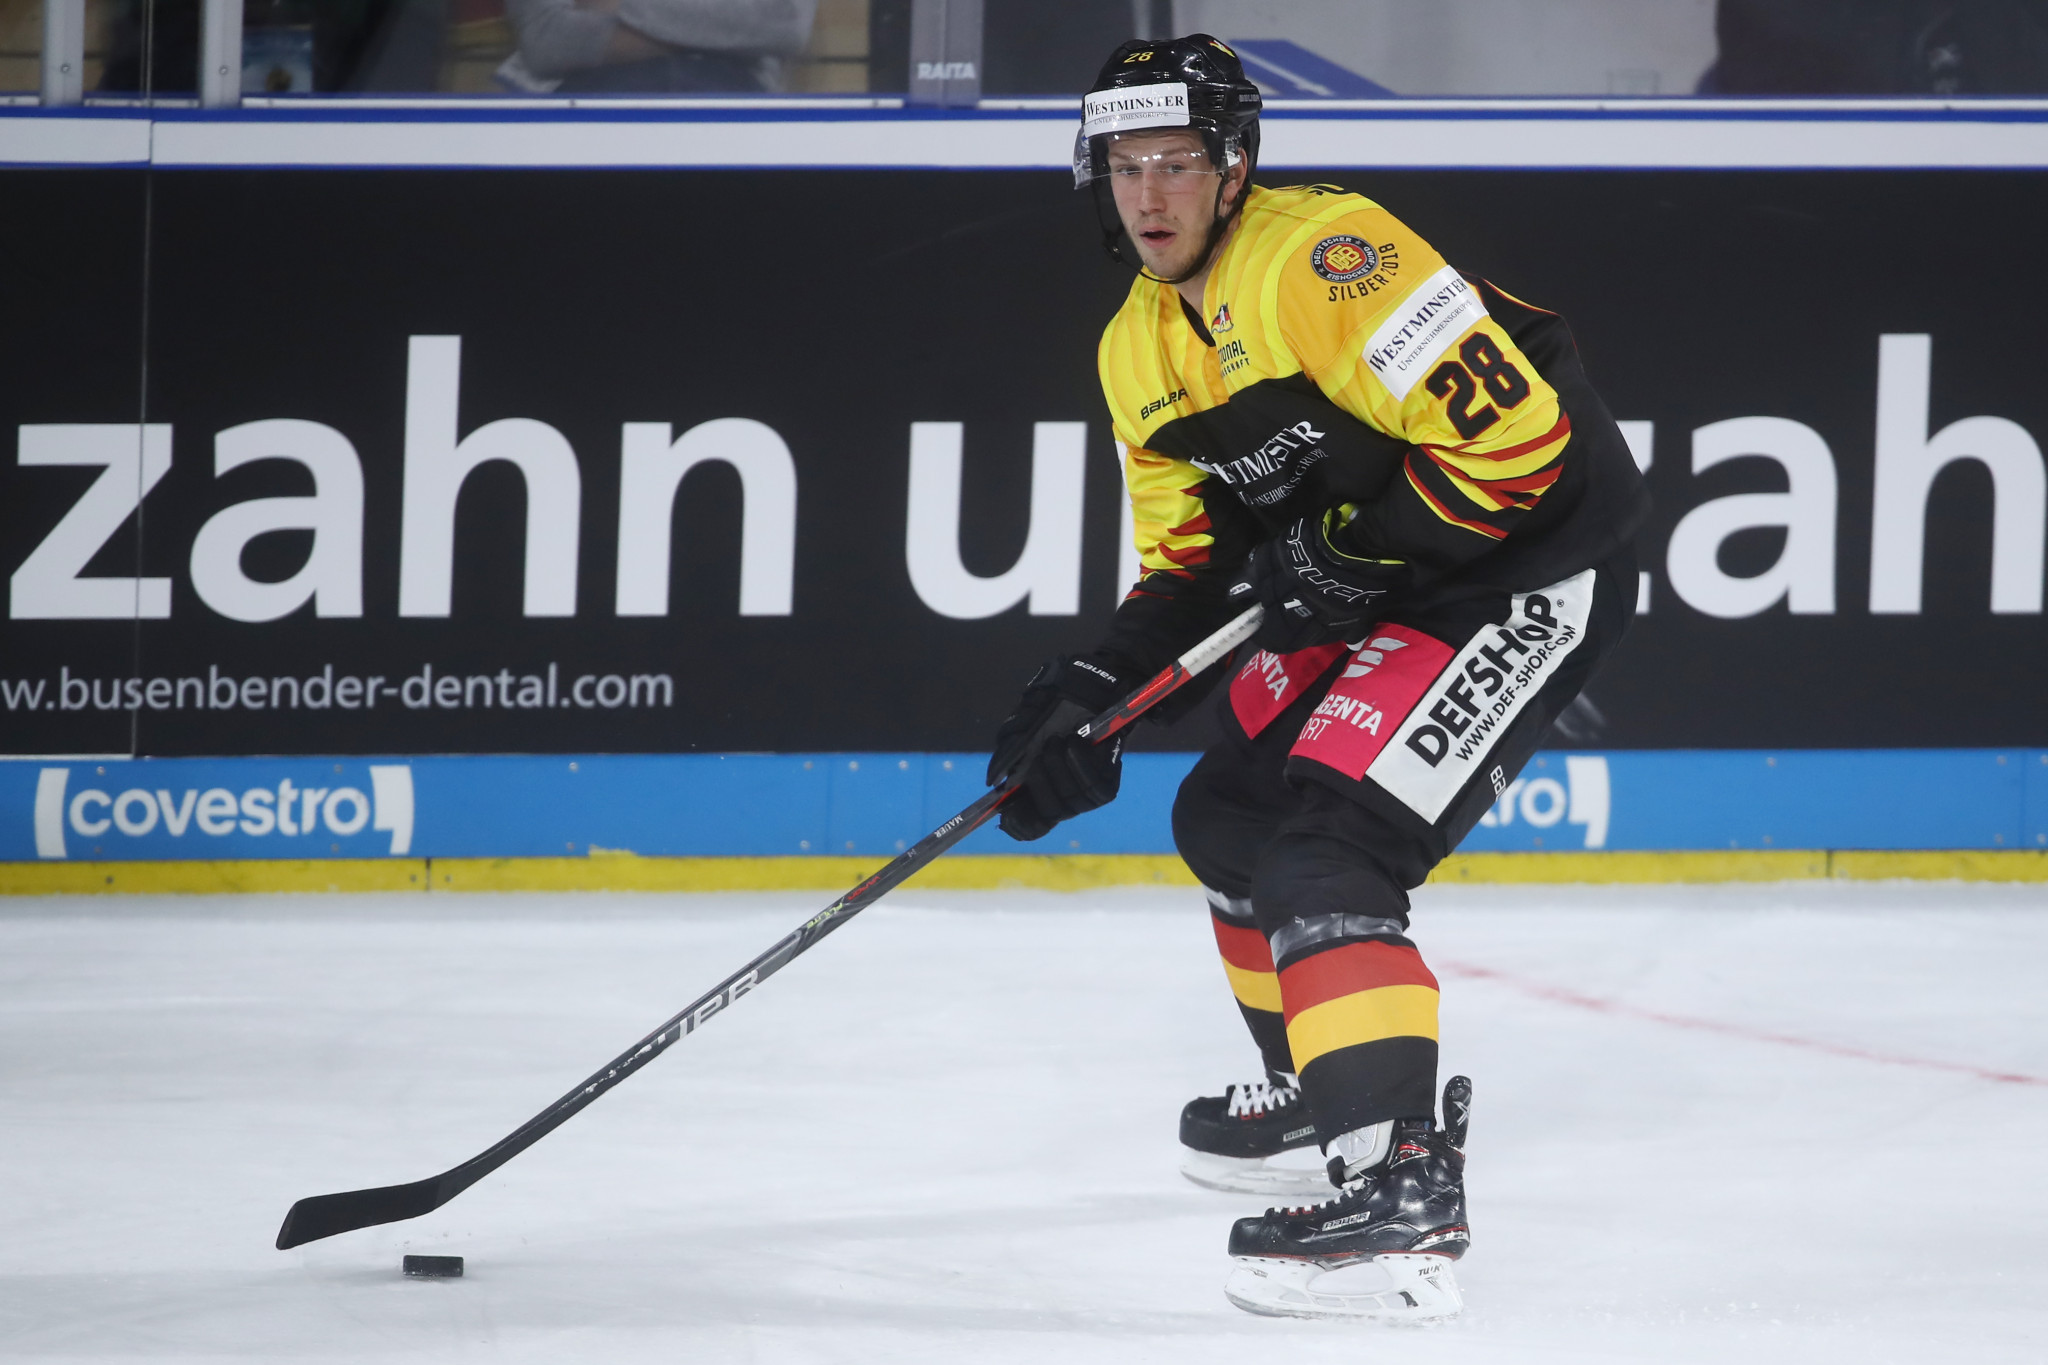 German ice hockey players carry out mini-internships at national federation